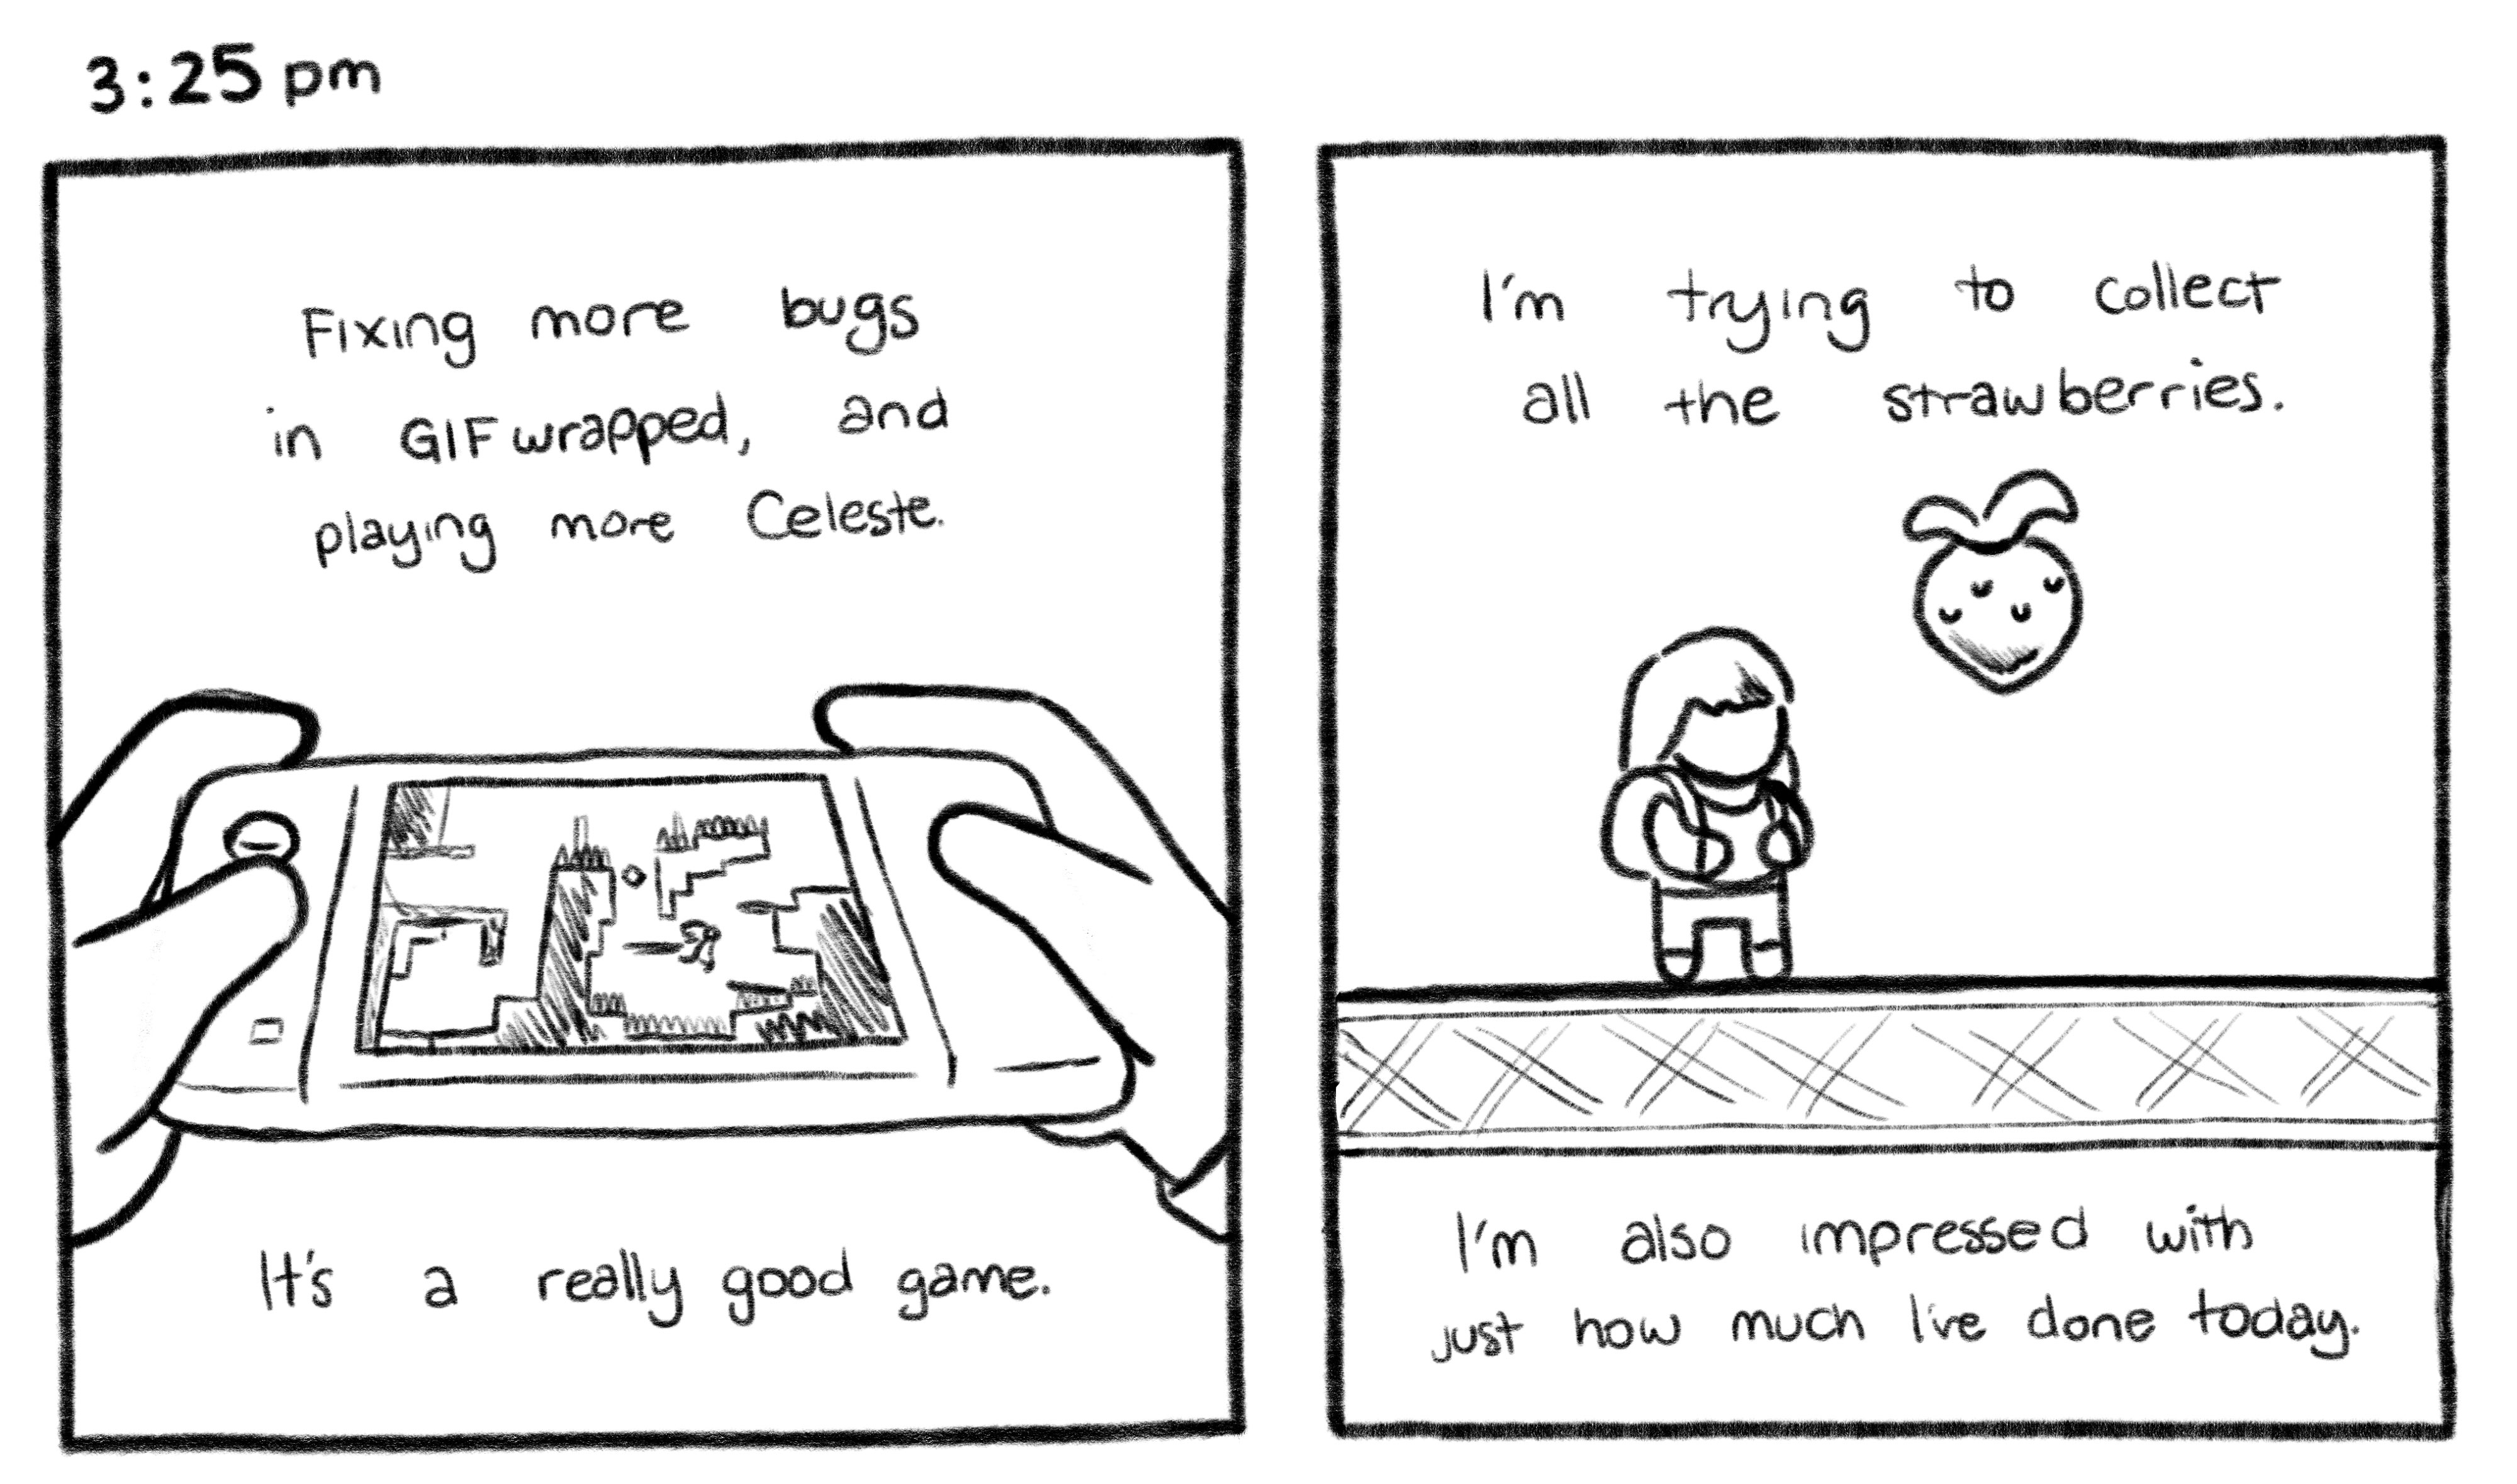 3:25pm; Panel 1: Close up of the Nintendo Switch from Jelly's point of view. Jelly V.O.: Fixing more bugs in GIFwrapped, and playing more Celeste. It's a really good game. Panel 2: An illustration of the main character of Celeste next to a strawberry. Jelly V.O.: I'm trying to collect all the strawberries. I'm also impressed with just how much I've done today.